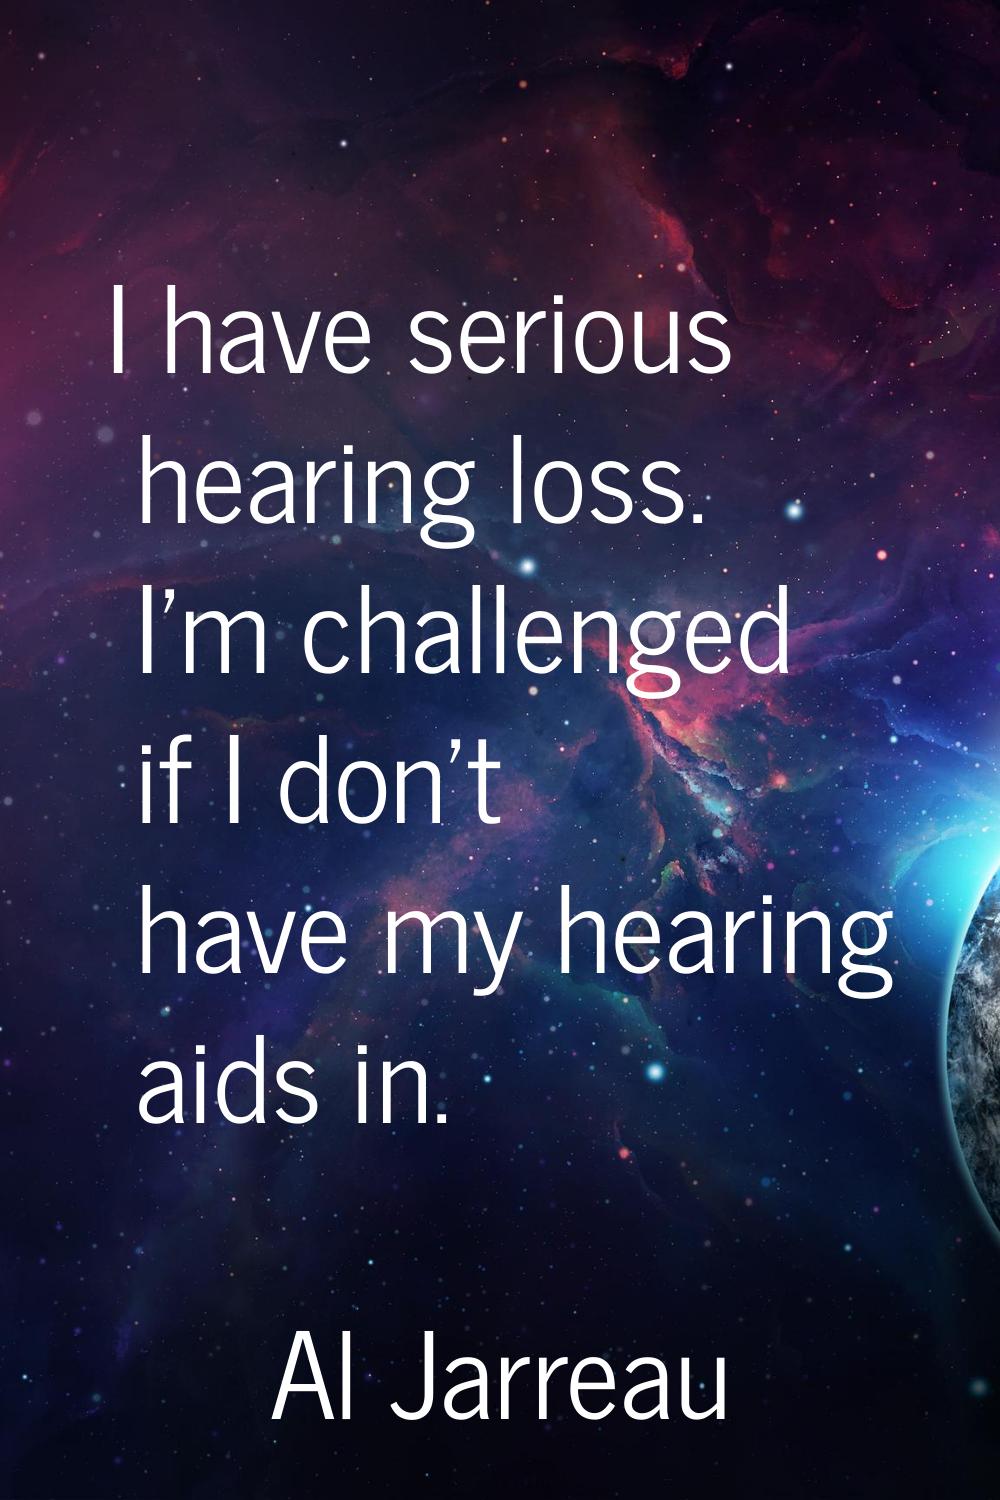 I have serious hearing loss. I'm challenged if I don't have my hearing aids in.